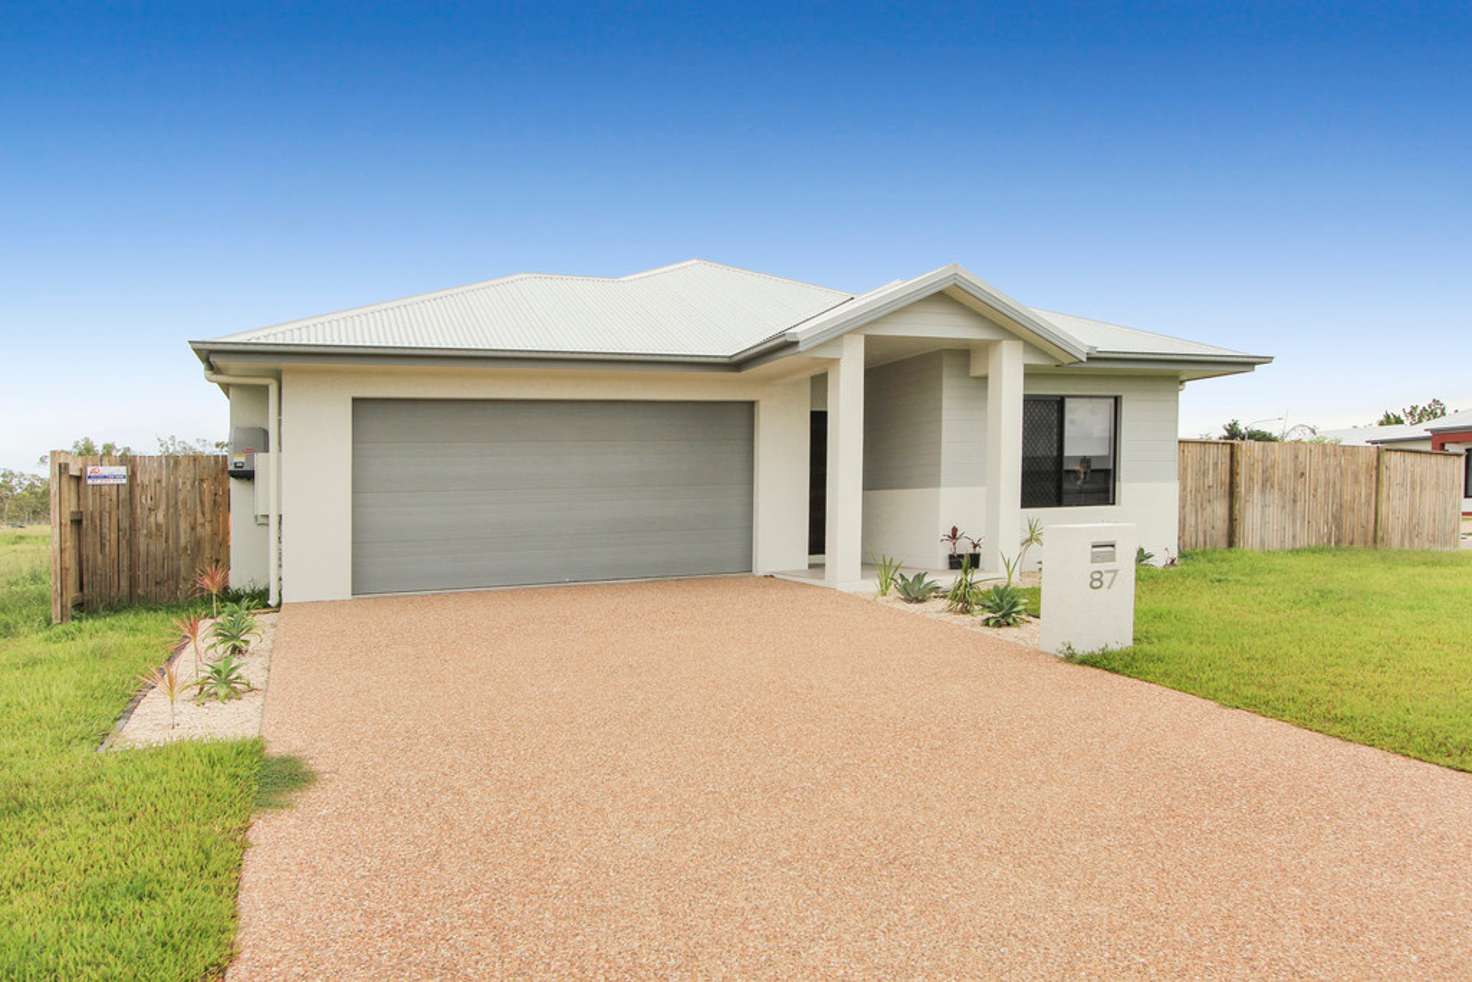 Main view of Homely house listing, 87 Periwinkle Way, Bohle Plains QLD 4817